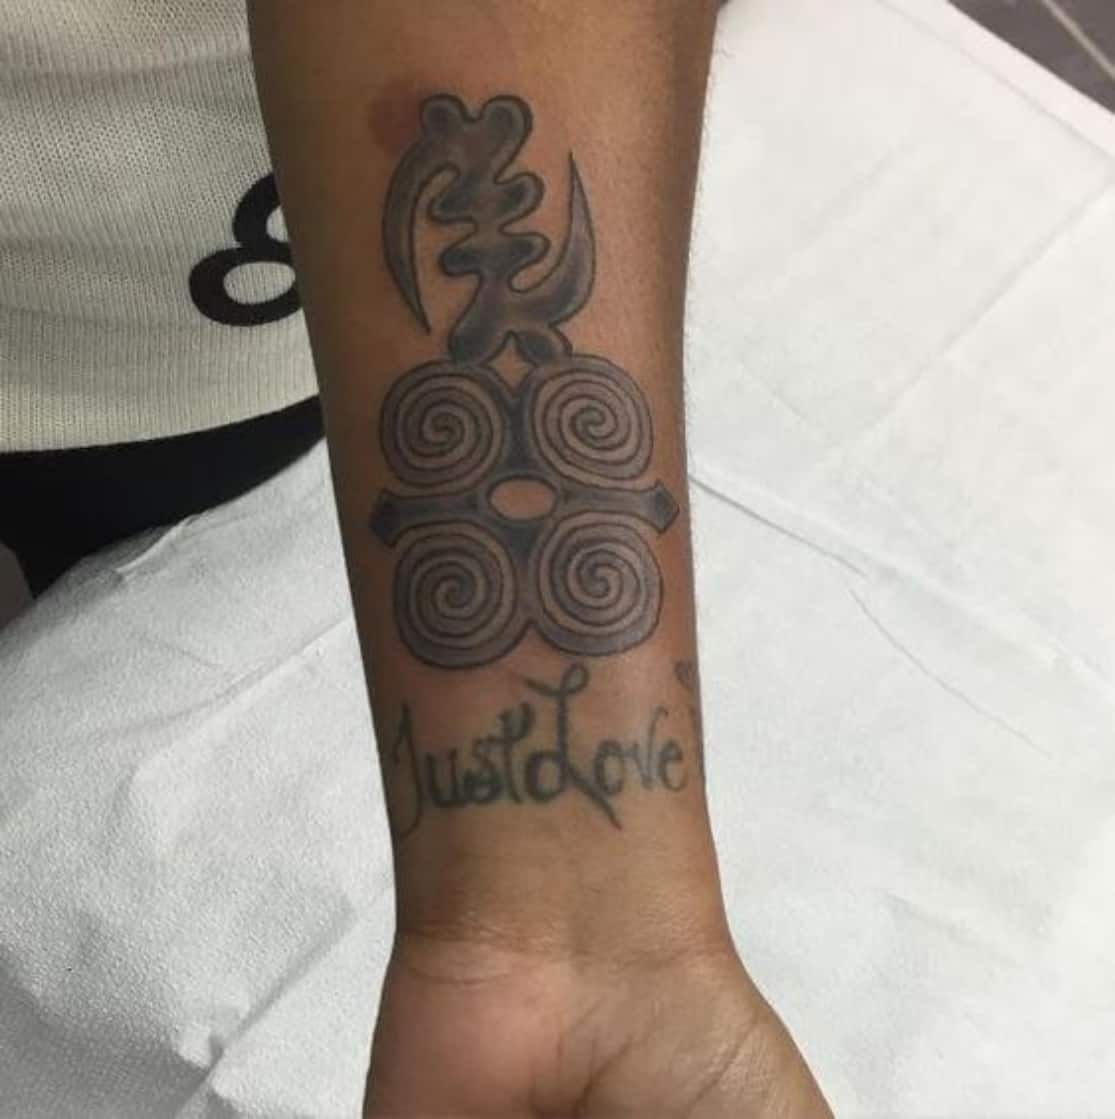 Nigerian tattoos and meanings